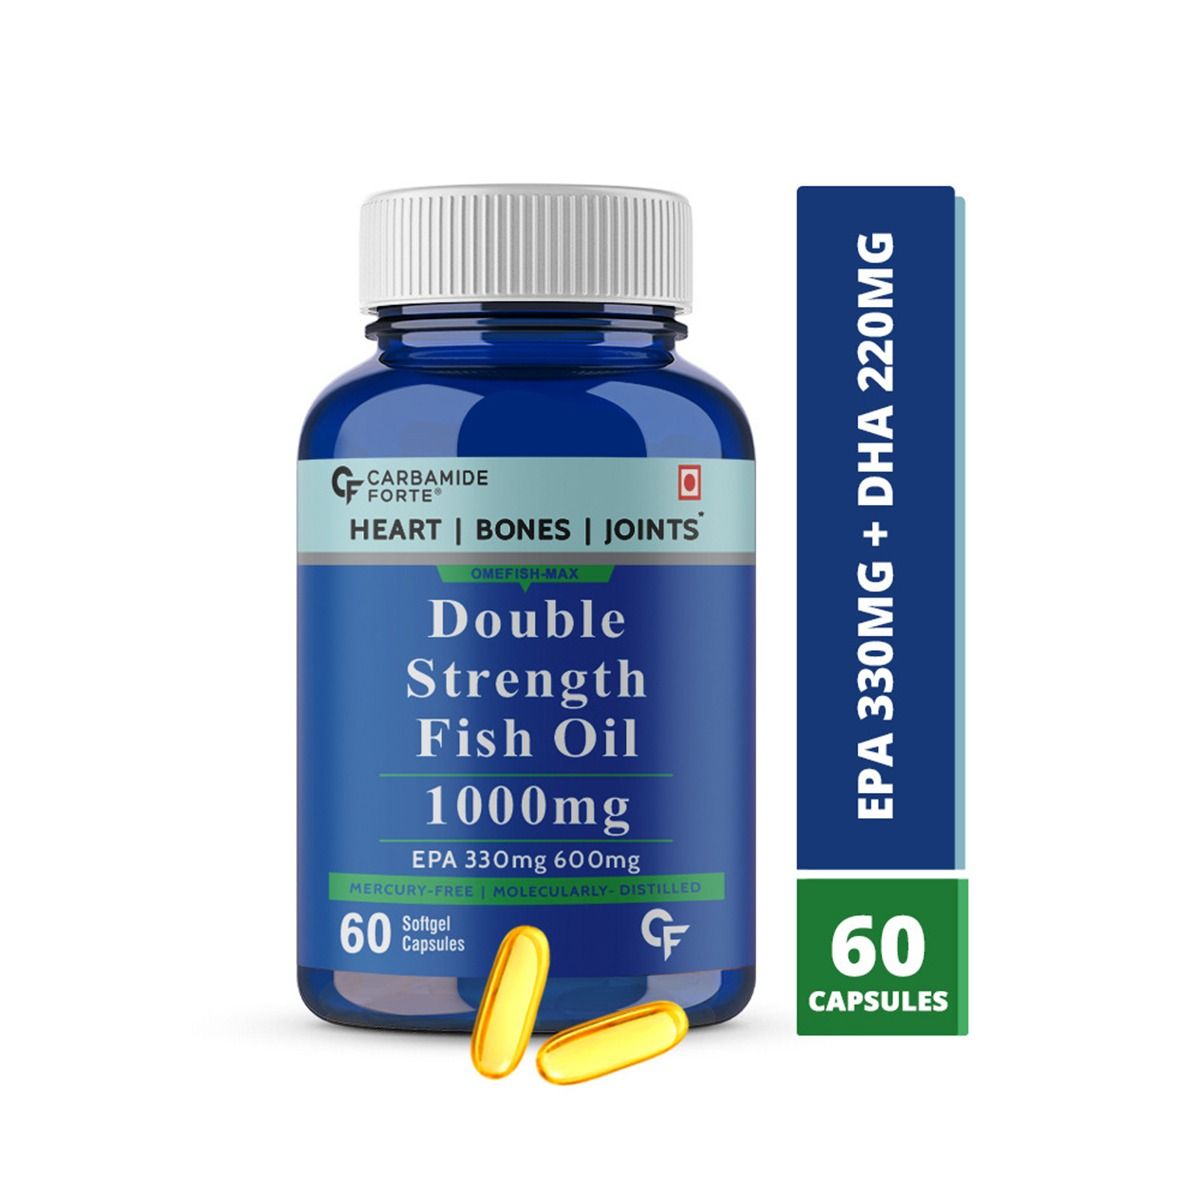 Buy Carbamide Forte Double Strength Fish Oil 1000mg Omega-3 600mg Softgel Capsules, 60 Count Online